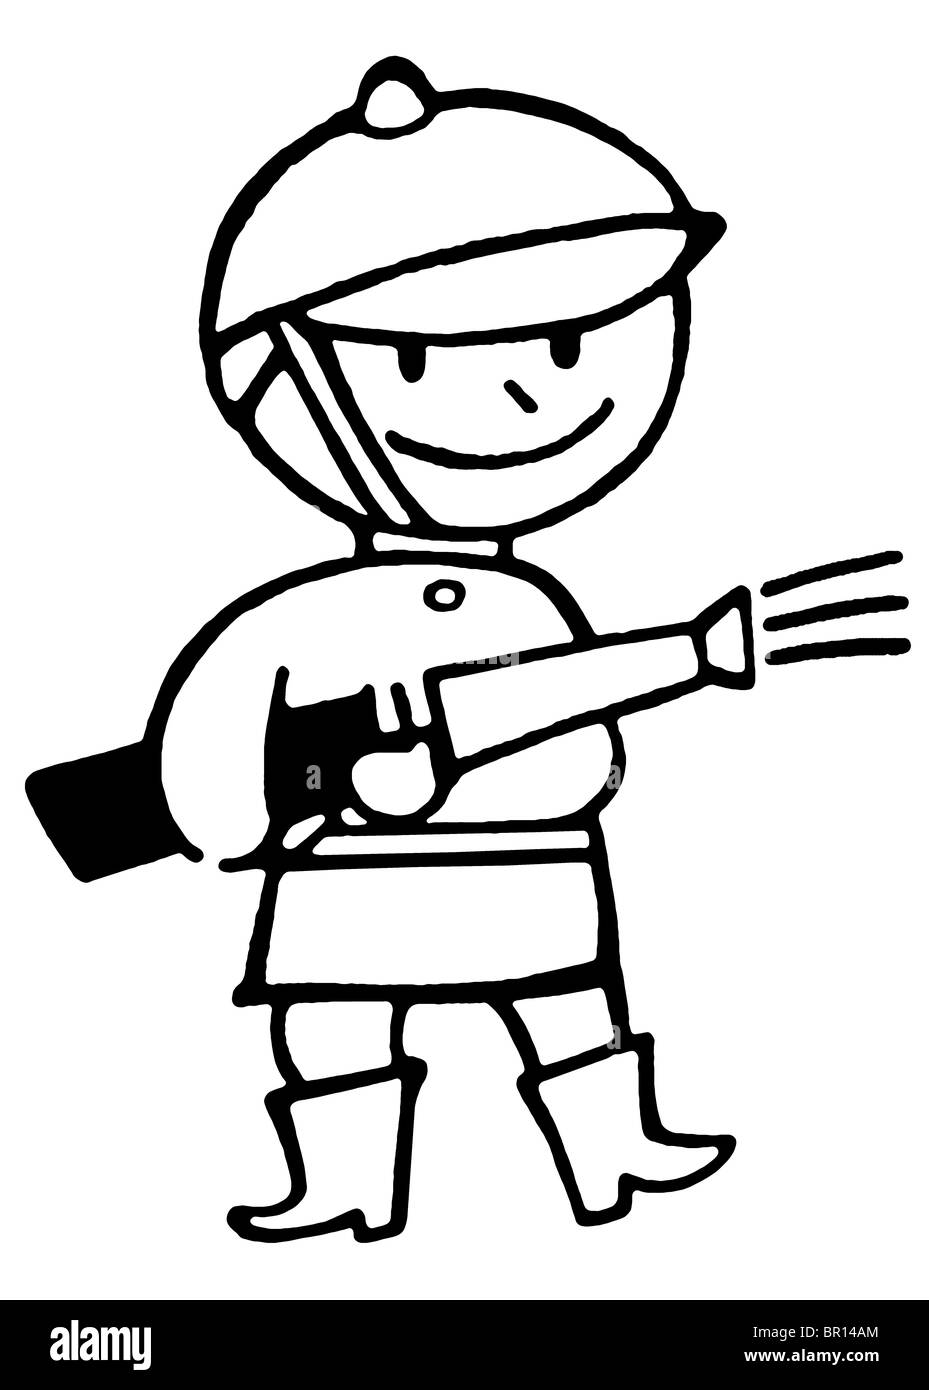 A black and white version of a cartoon style drawing of a fireman Stock Photo